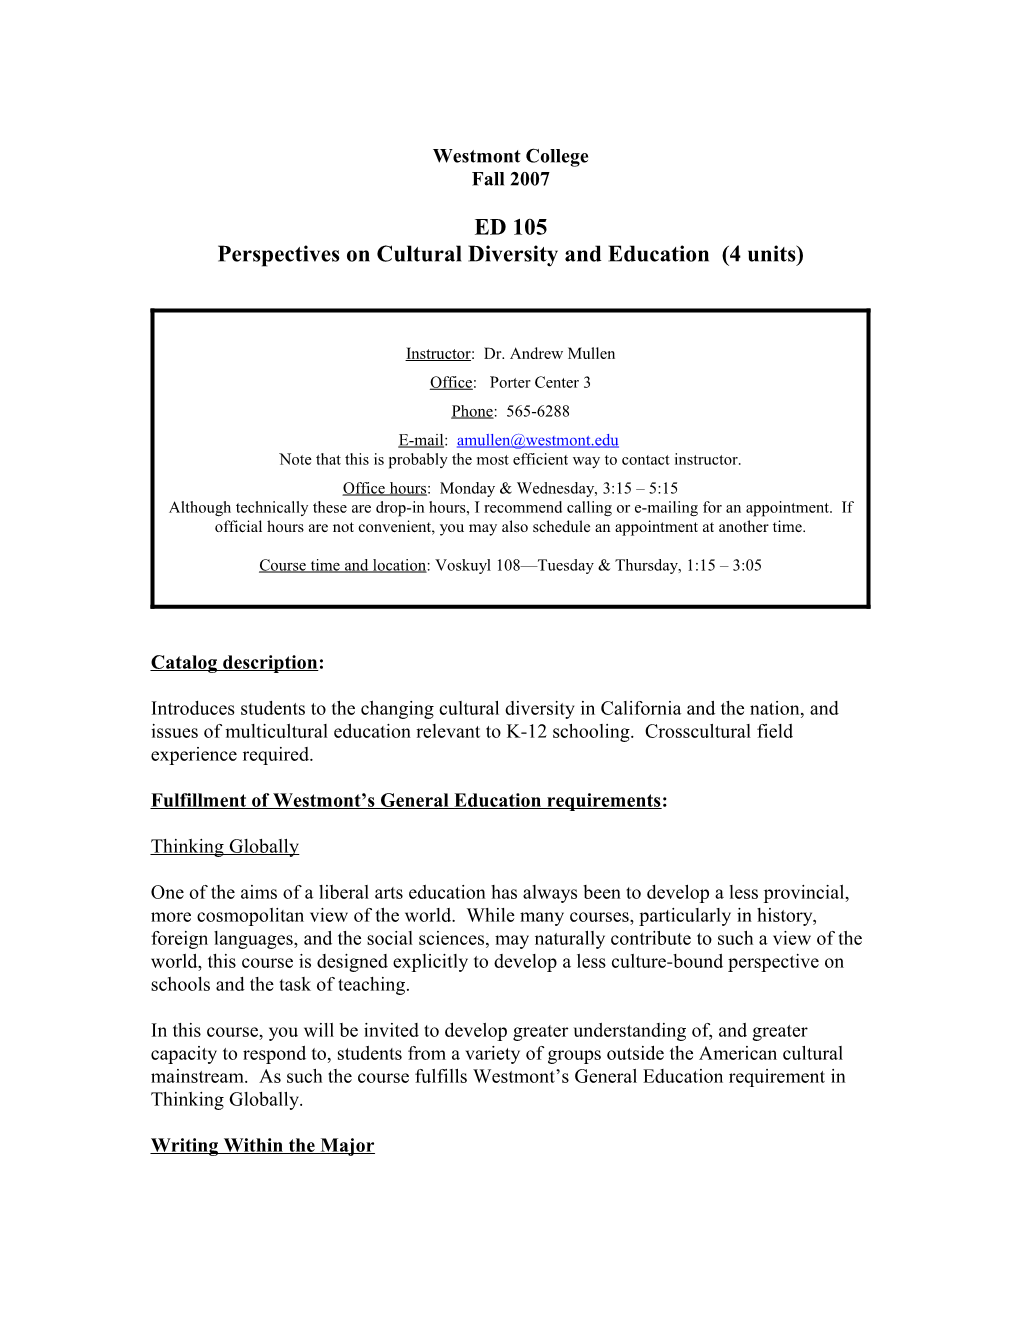 Perspectives on Cultural Diversity and Education (4 Units)